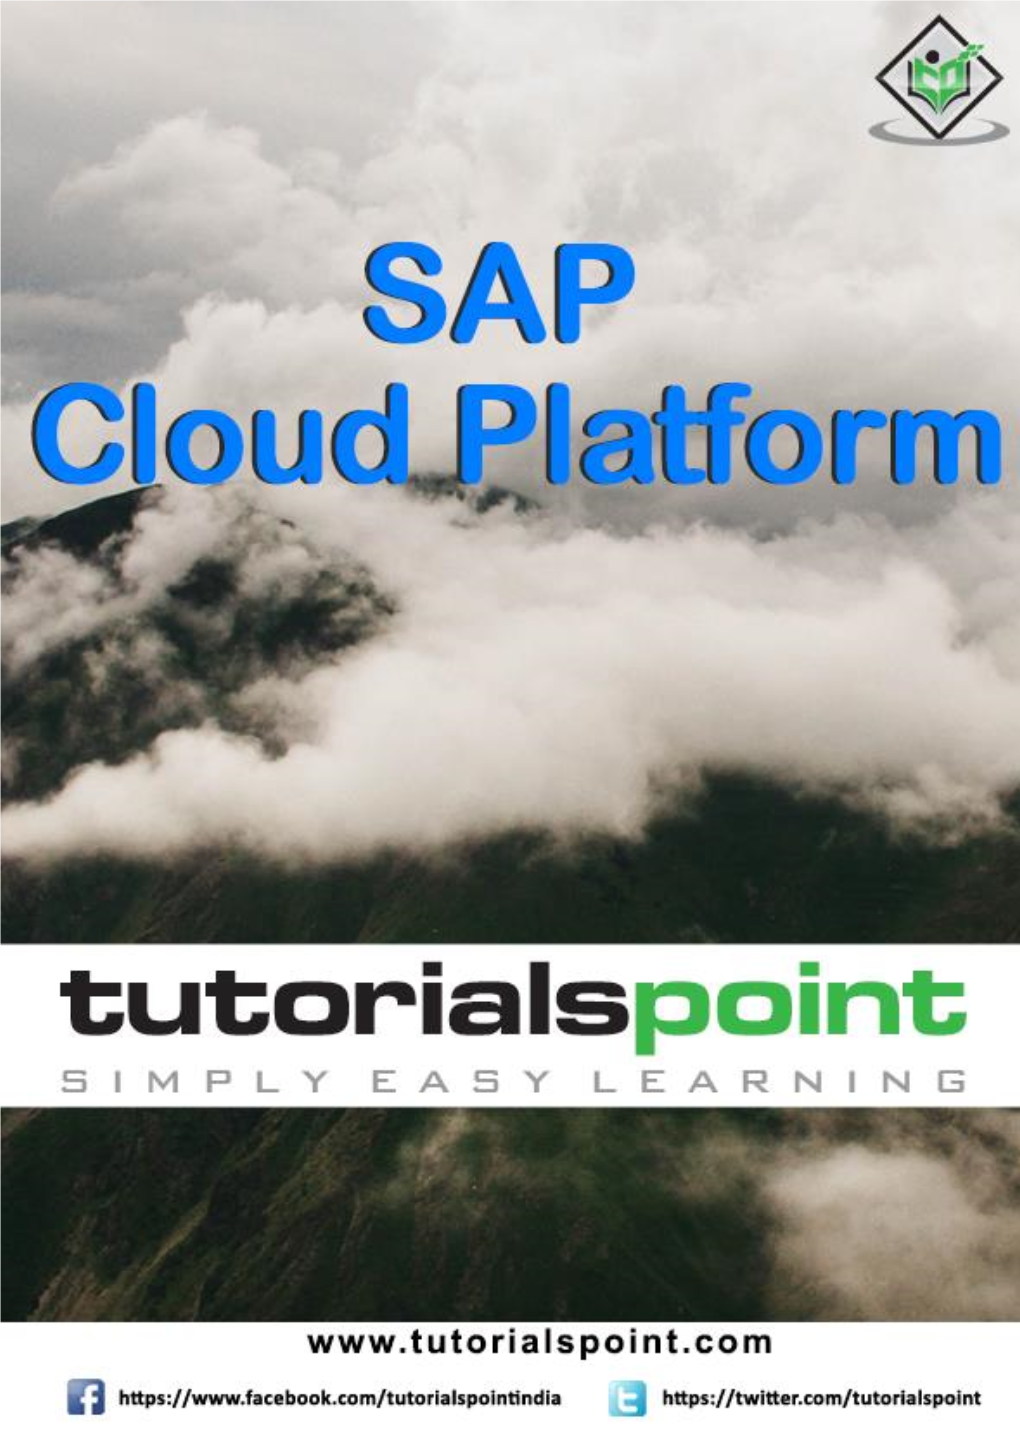 SAP Cloud Platform Is a Cloud-Based Tool to Develop and Deploy Custom Applications